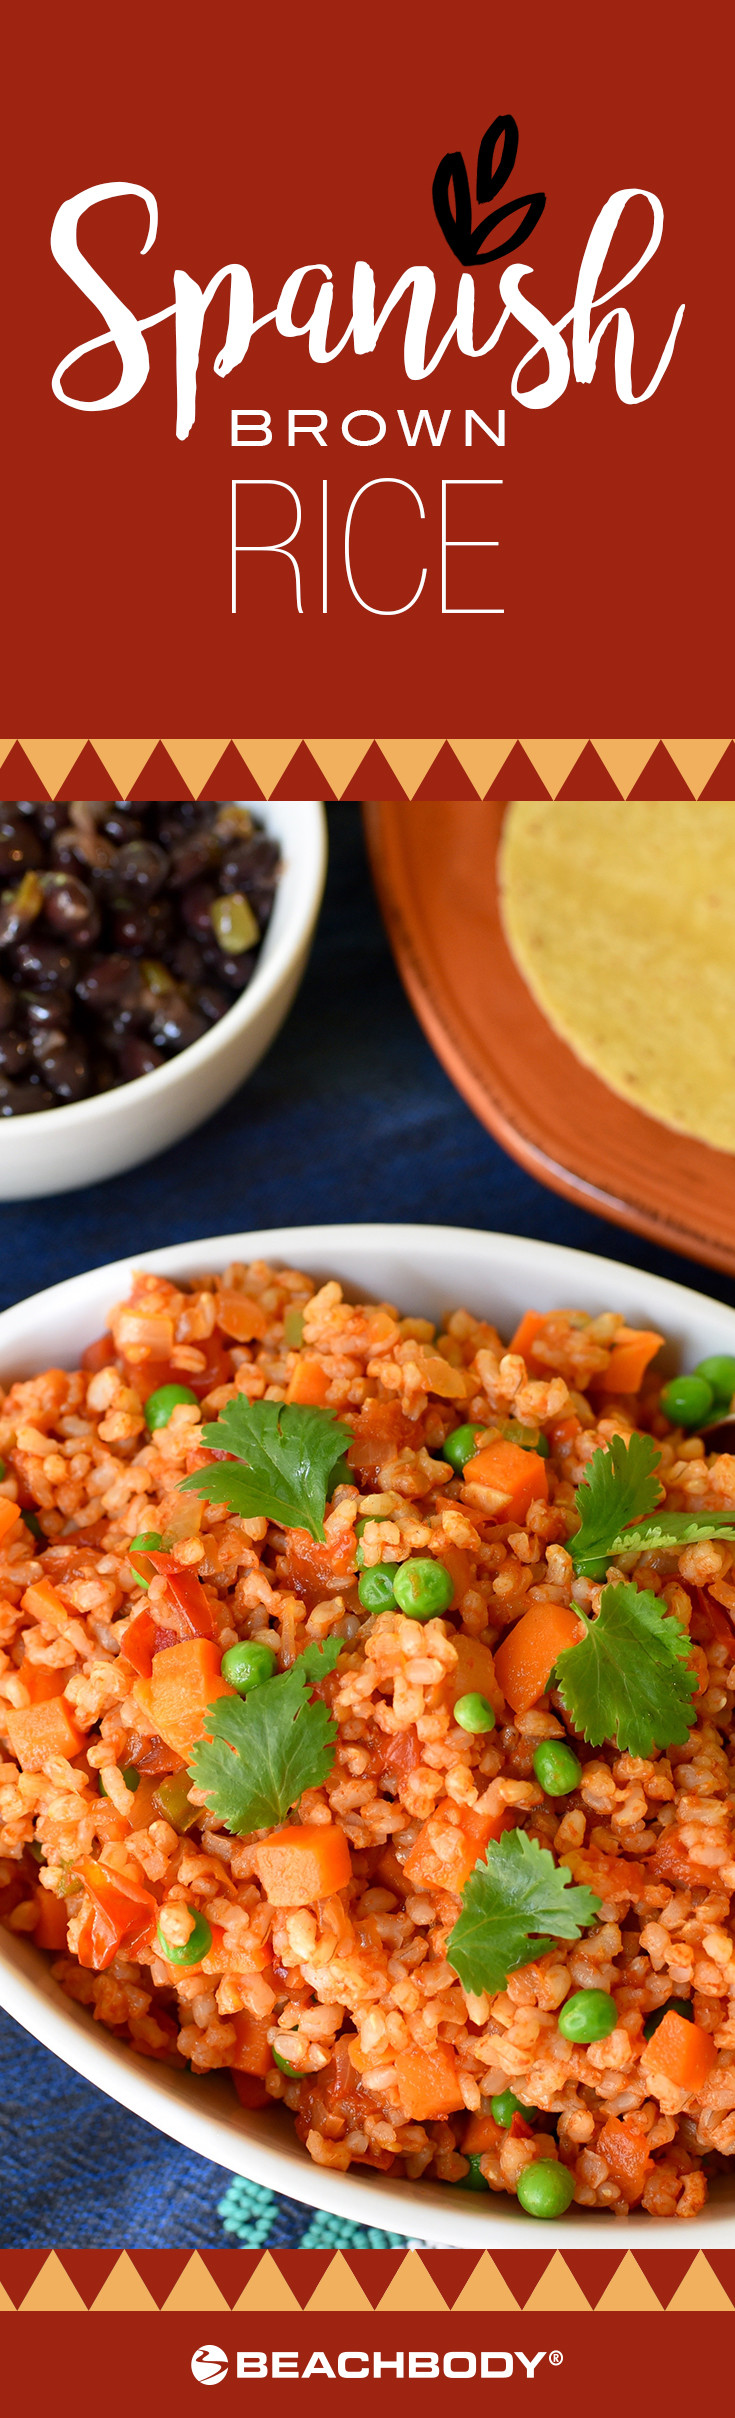 Mexican Rice With Tomato Paste
 Spanish Brown Rice Recipe